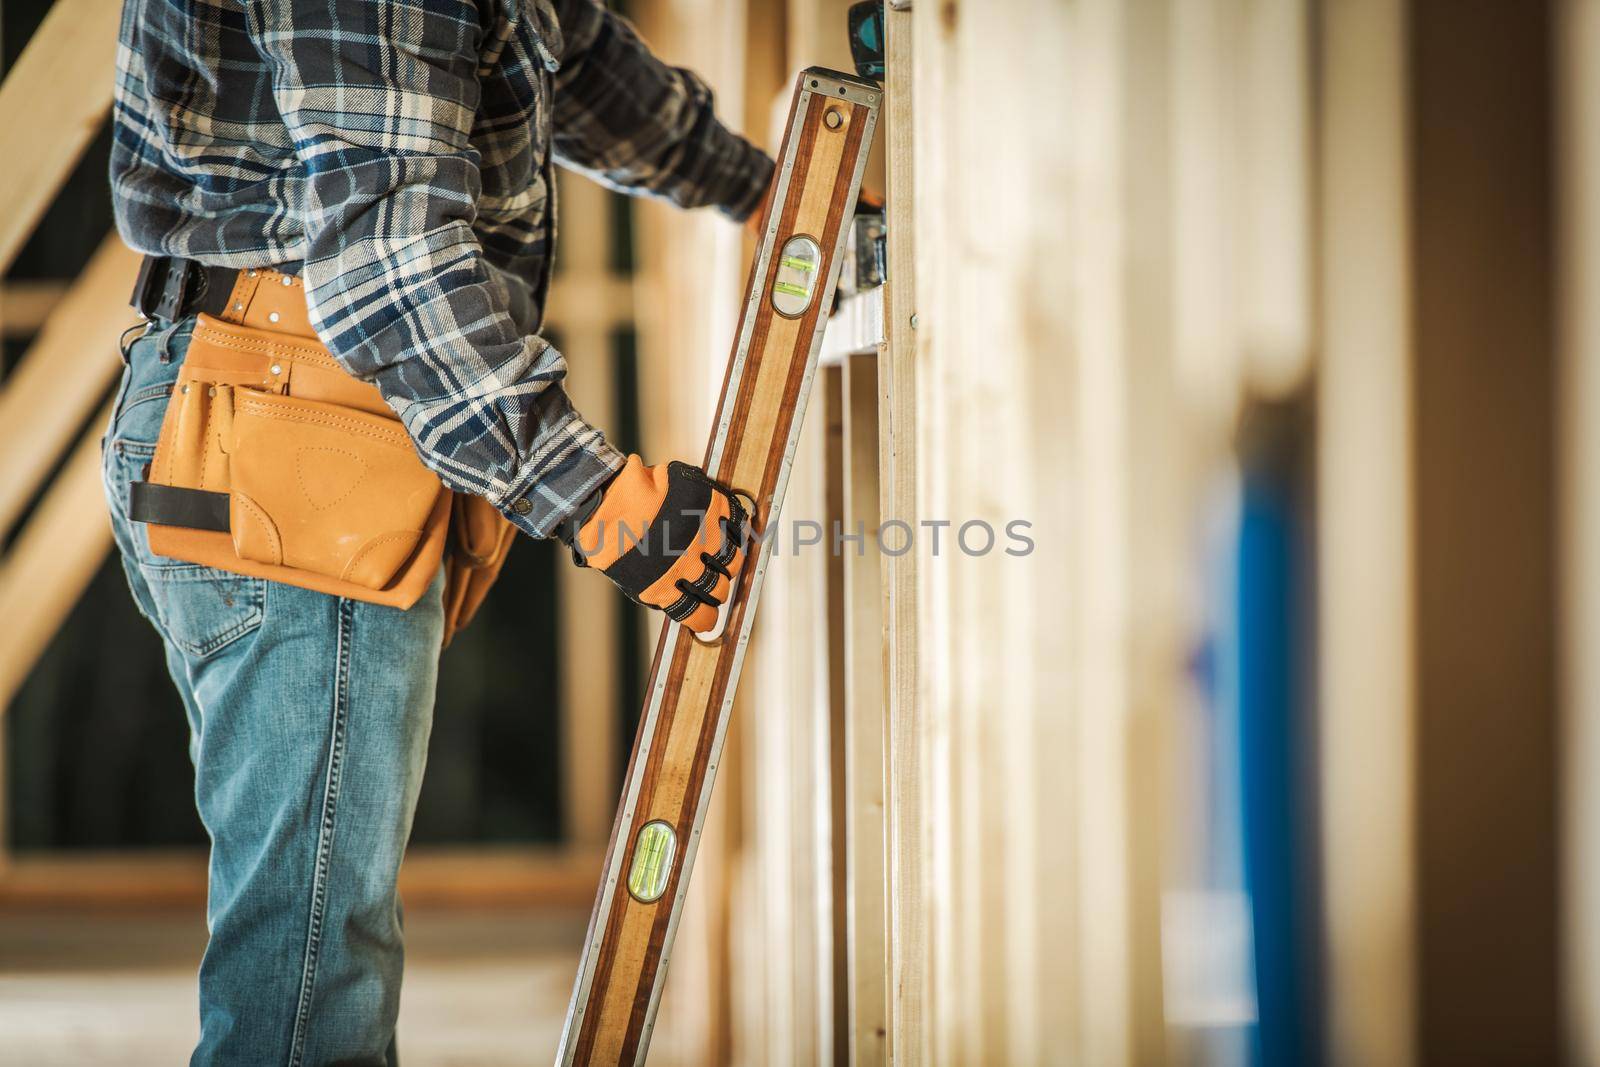 Contractor Worker Taking Spirit Level Tool to Make Sure the Wooden Frame Alignment is Correct. Construction Tools and Building Technologies.